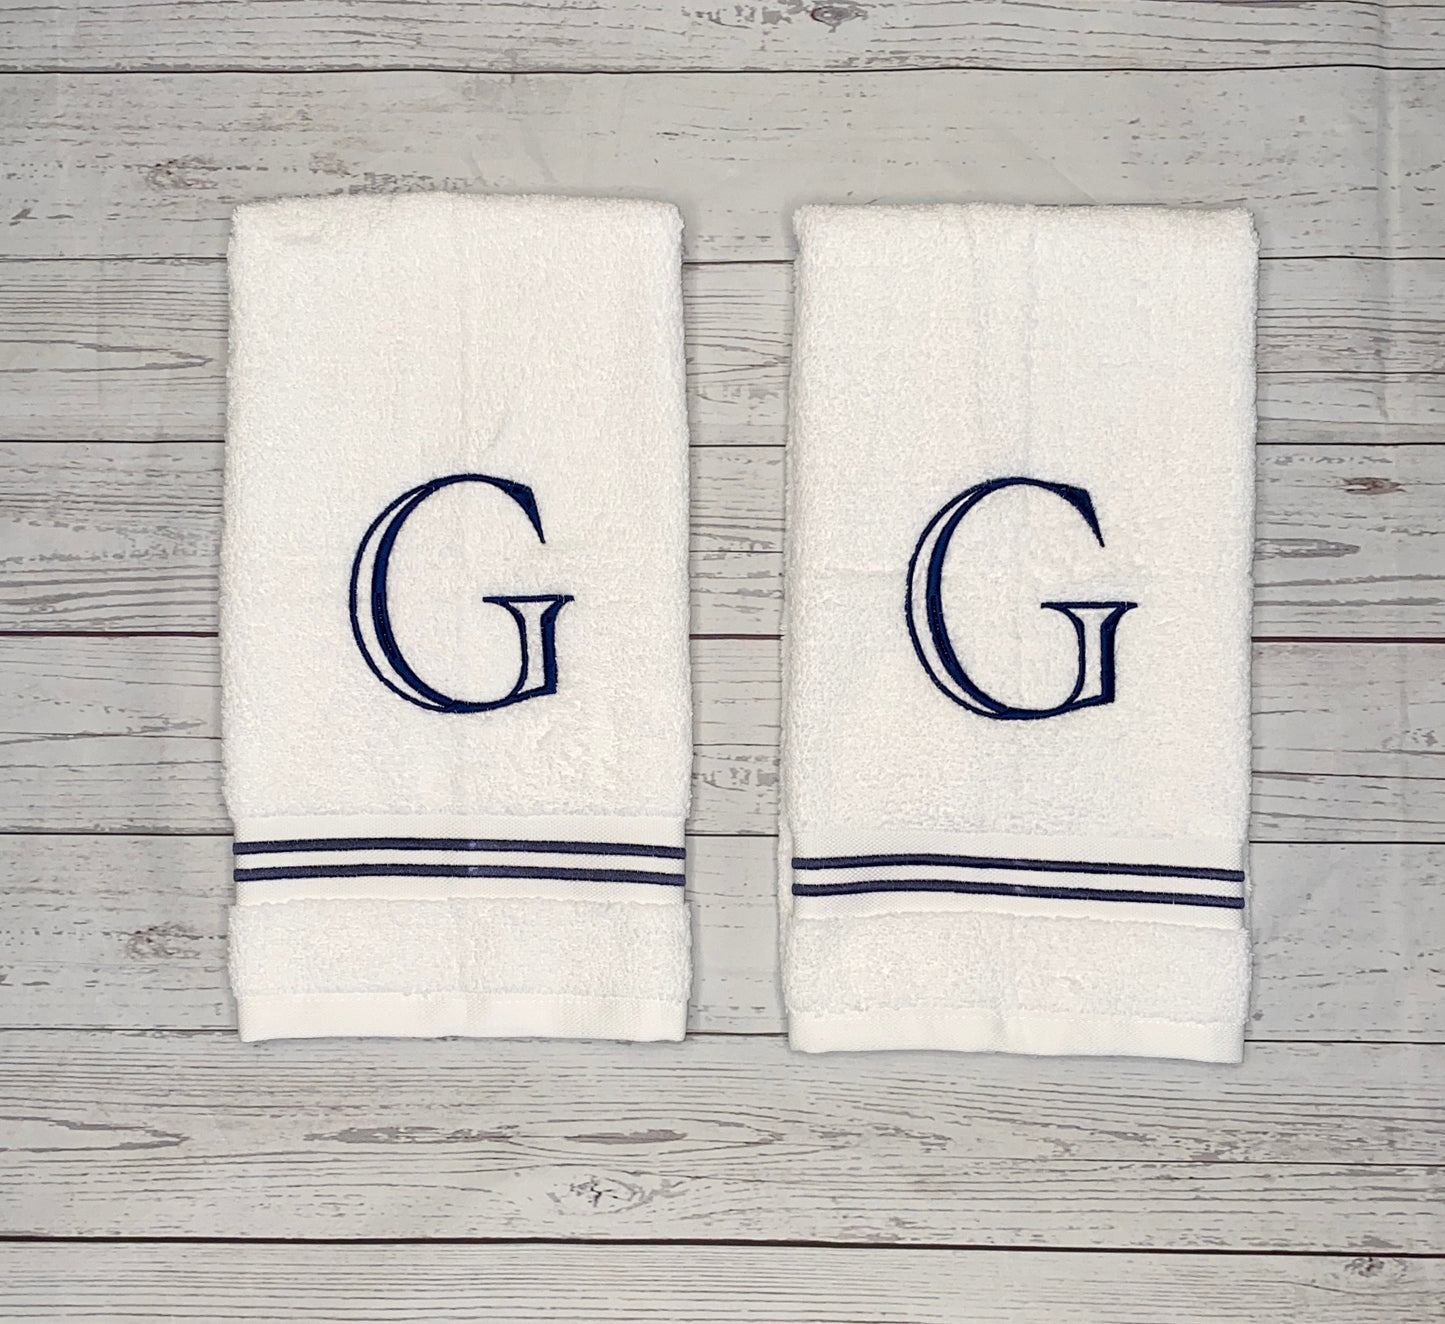 Monogrammed Hand Towel for Bathroom, Decorative Bathroom Towels, Personalized Towels, Monogrammed Towels, Initial with Flourish, Guest Towel